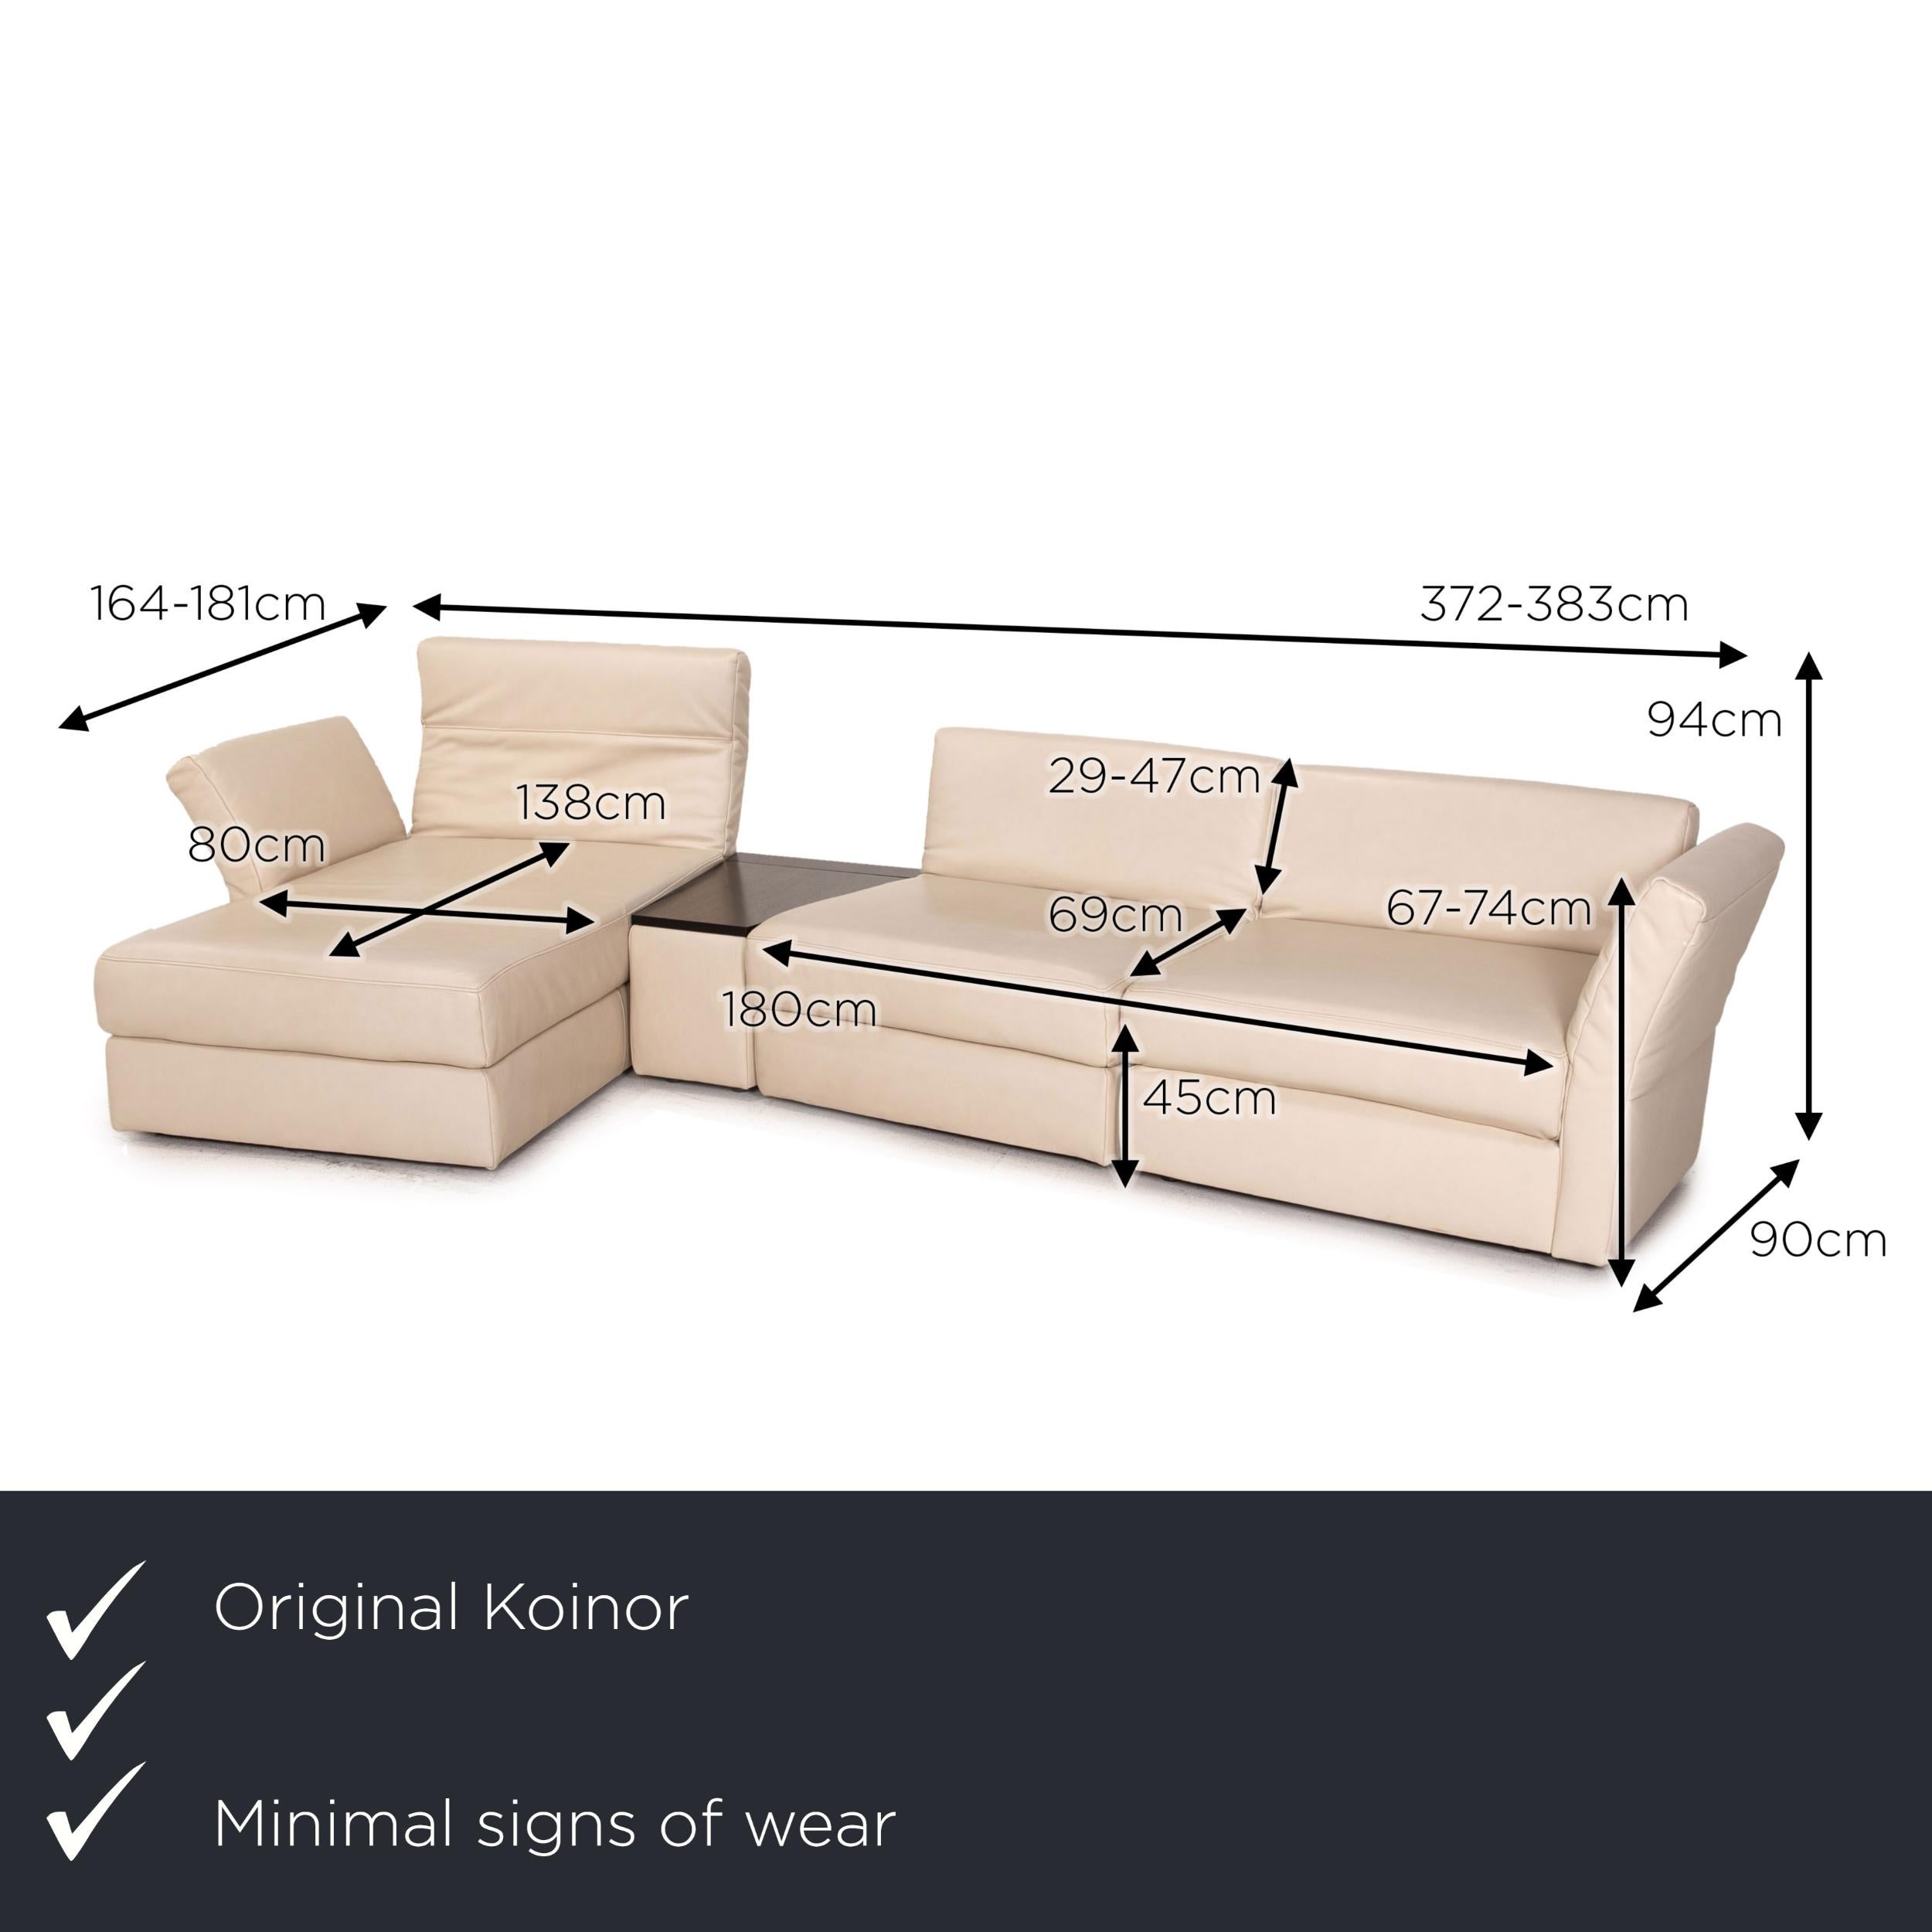 We present to you a Koinor Avanti leather corner sofa beige sofa couch function.

 

 Product measurements in centimeters:
 

 depth: 164
 width: 164
 height: 94
 seat height: 45
 rest height: 67
 seat depth: 138
 seat width: 80
 back